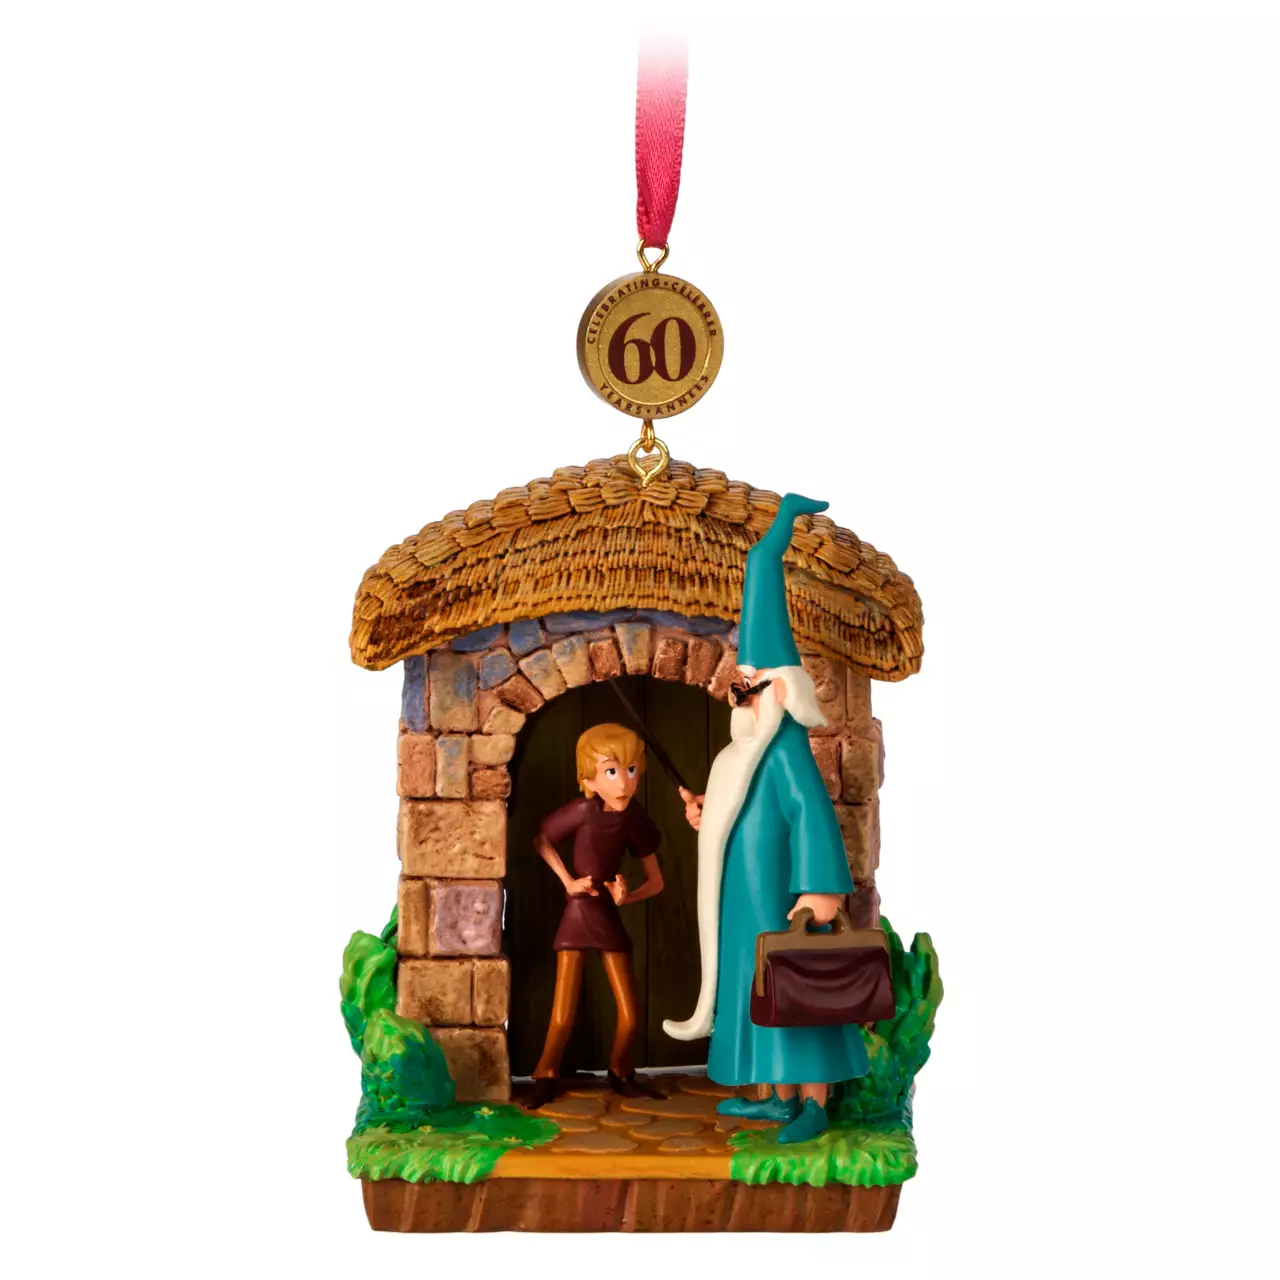 The Sword in the Stone Legacy Sketchbook Christmas Ornament – 60th Anniversary